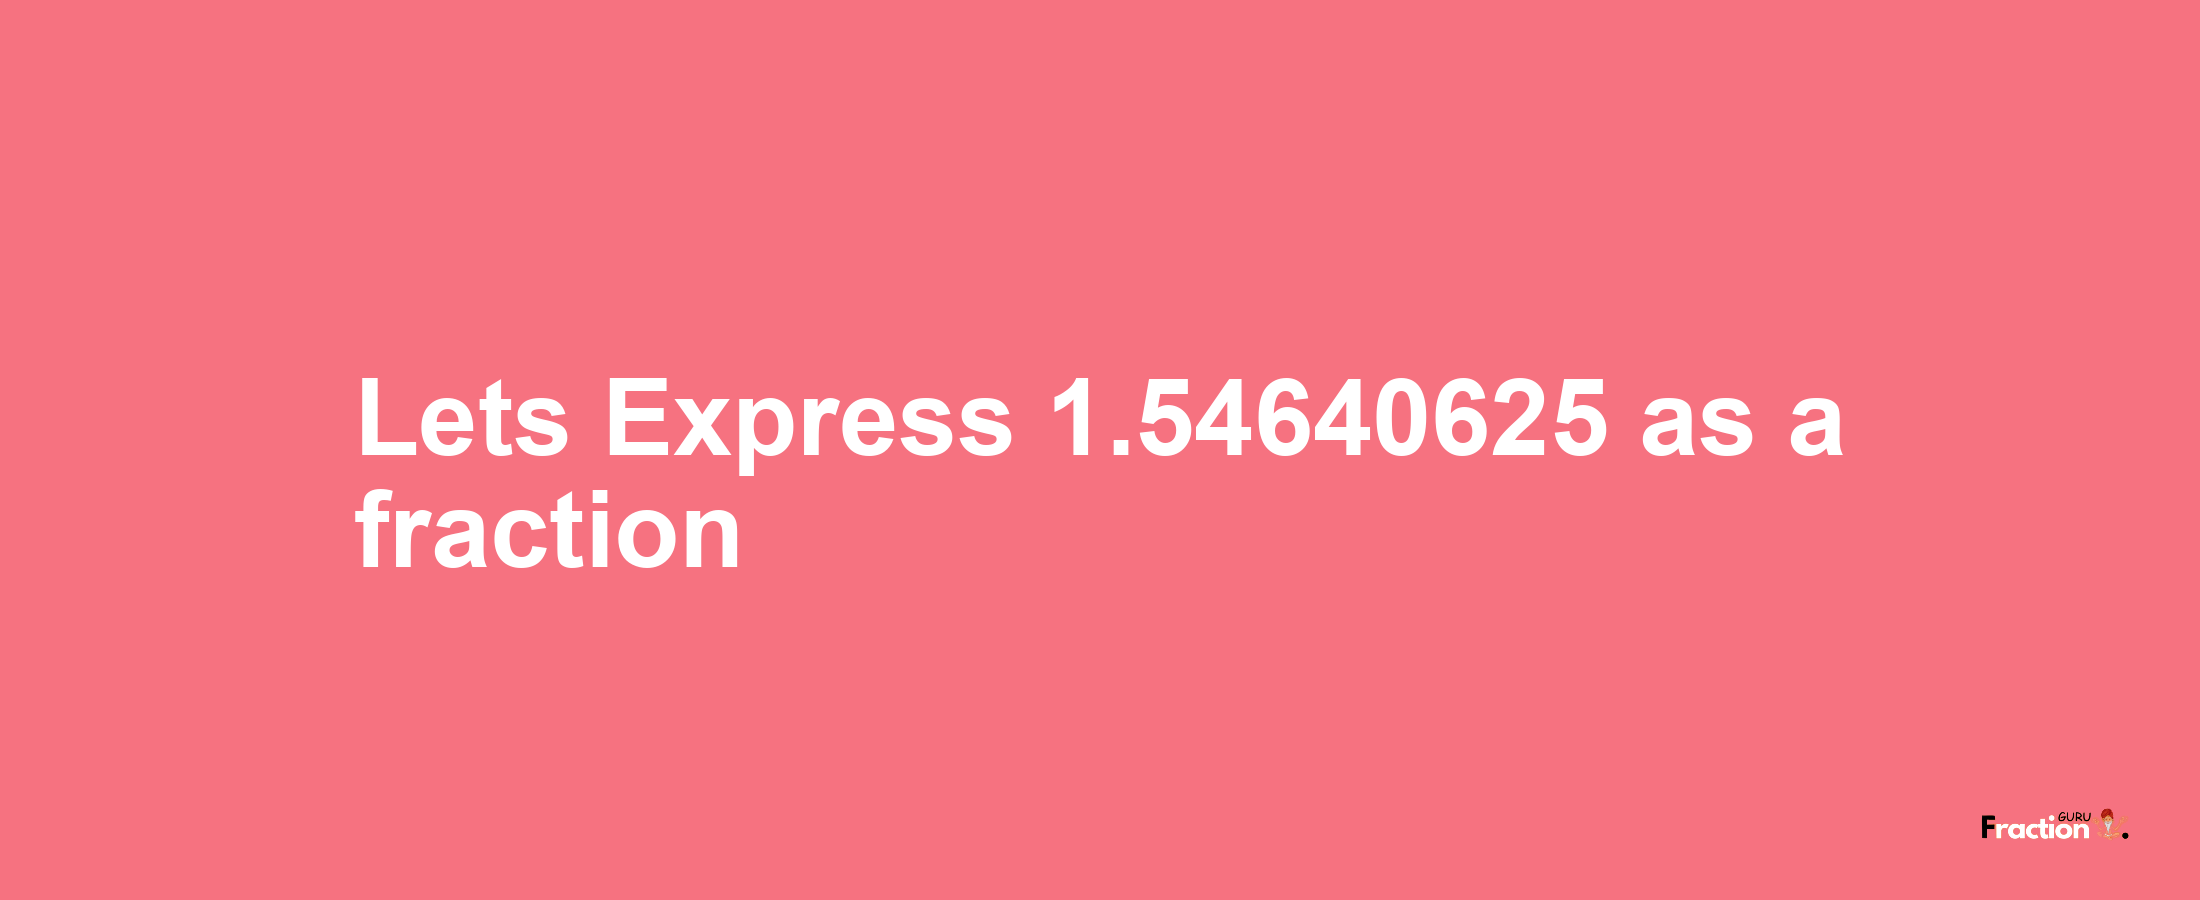 Lets Express 1.54640625 as afraction